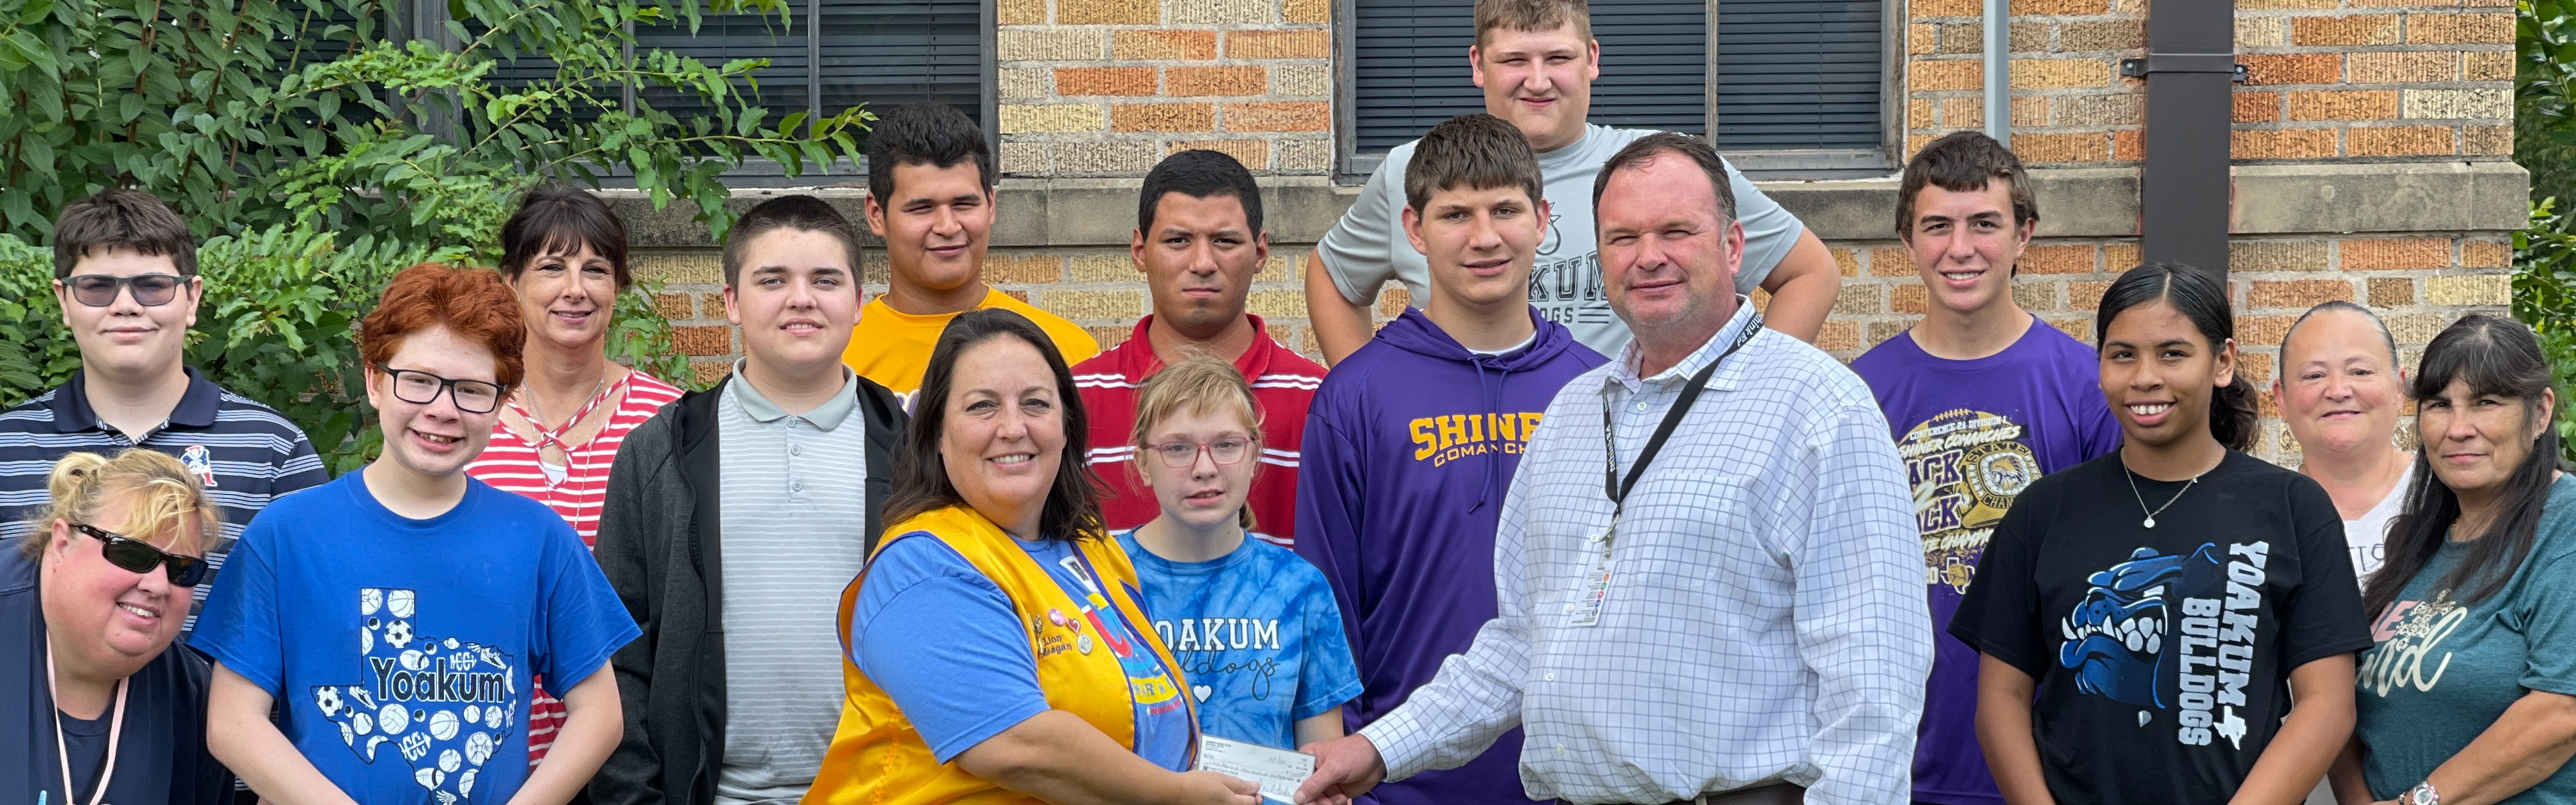 Students and Staff Receiving Donation Check from Lions Club Member